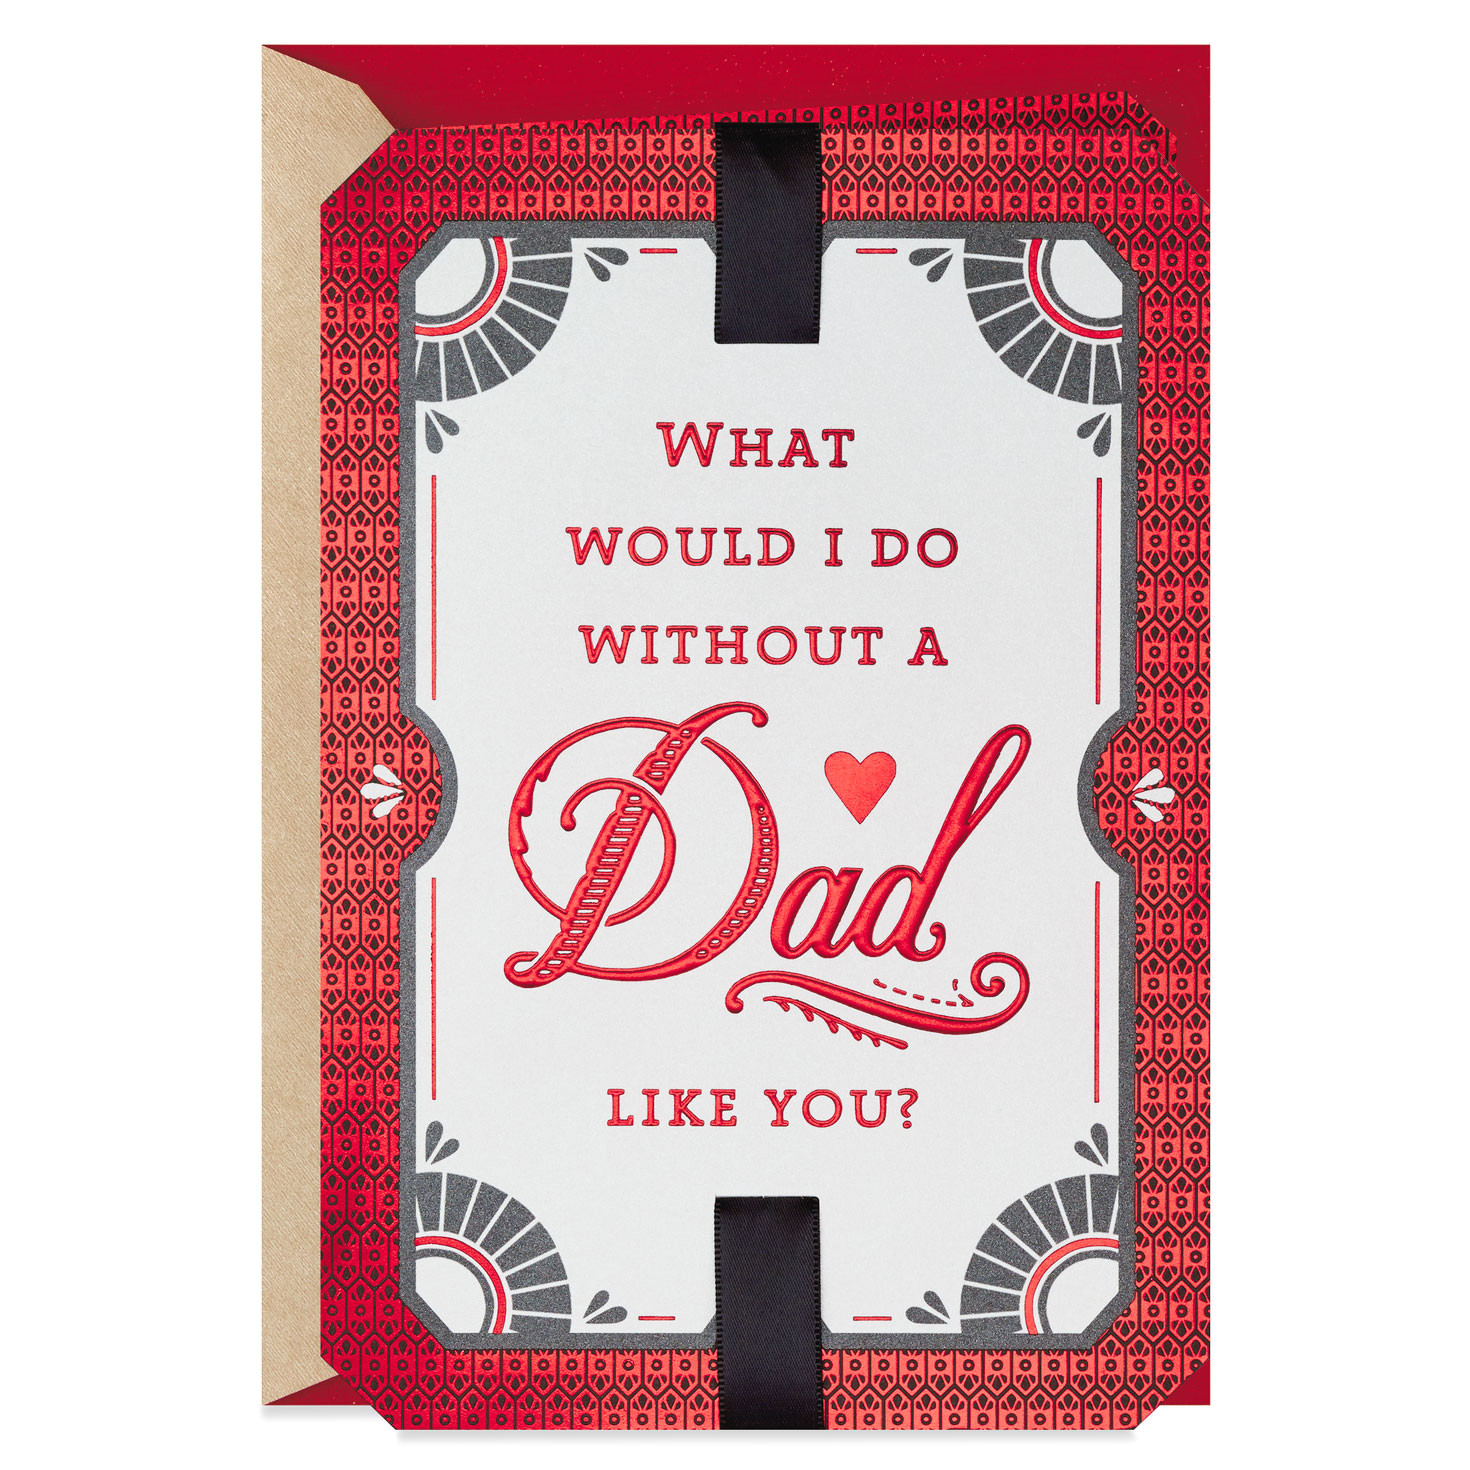 a dad like you valentines day card 529vee2133 01 jpg